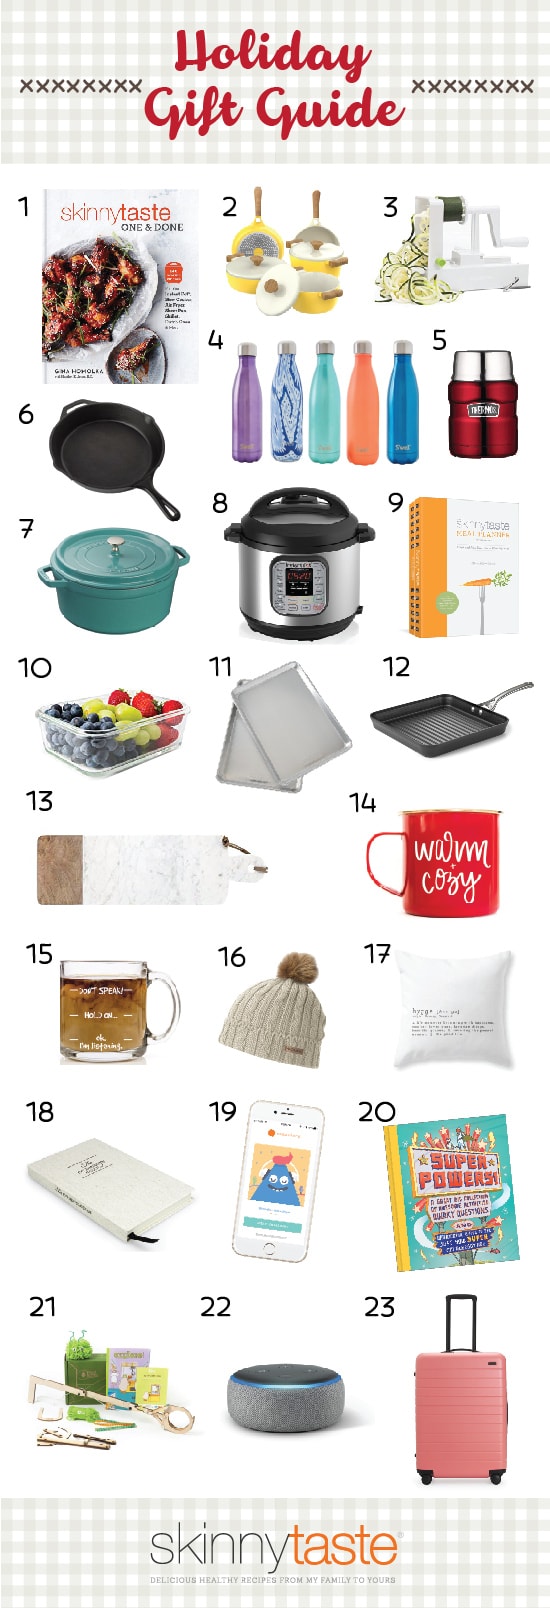 a Holiday Gift Guide to help you find something for everyone on your list